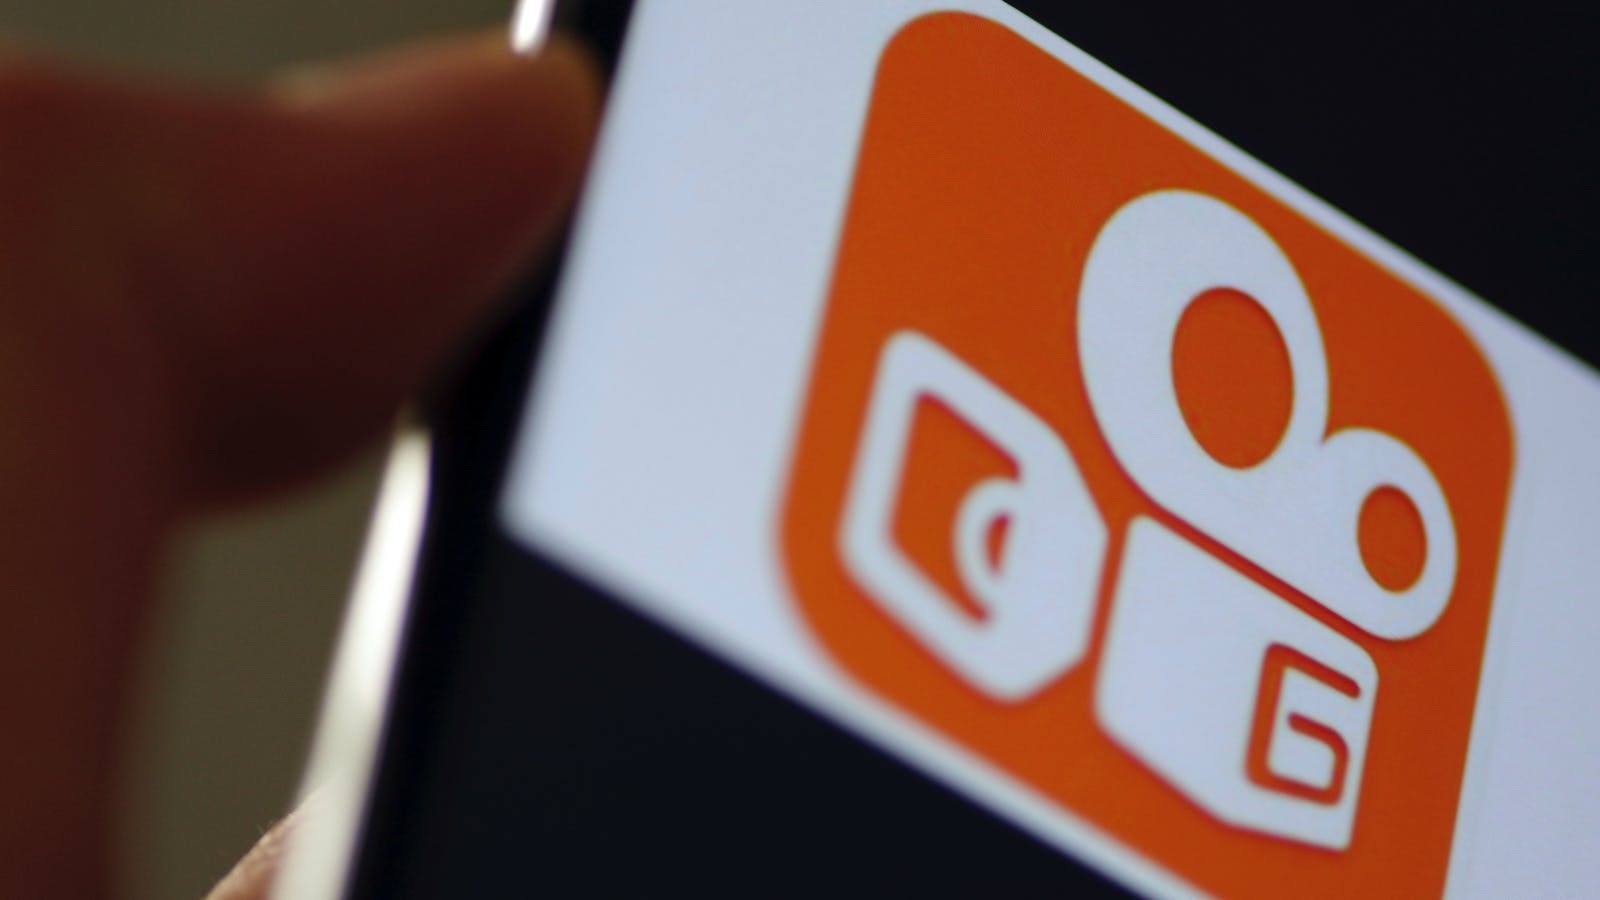 Short video app Kuaishou is launching in North America. Photo by the Associated Press